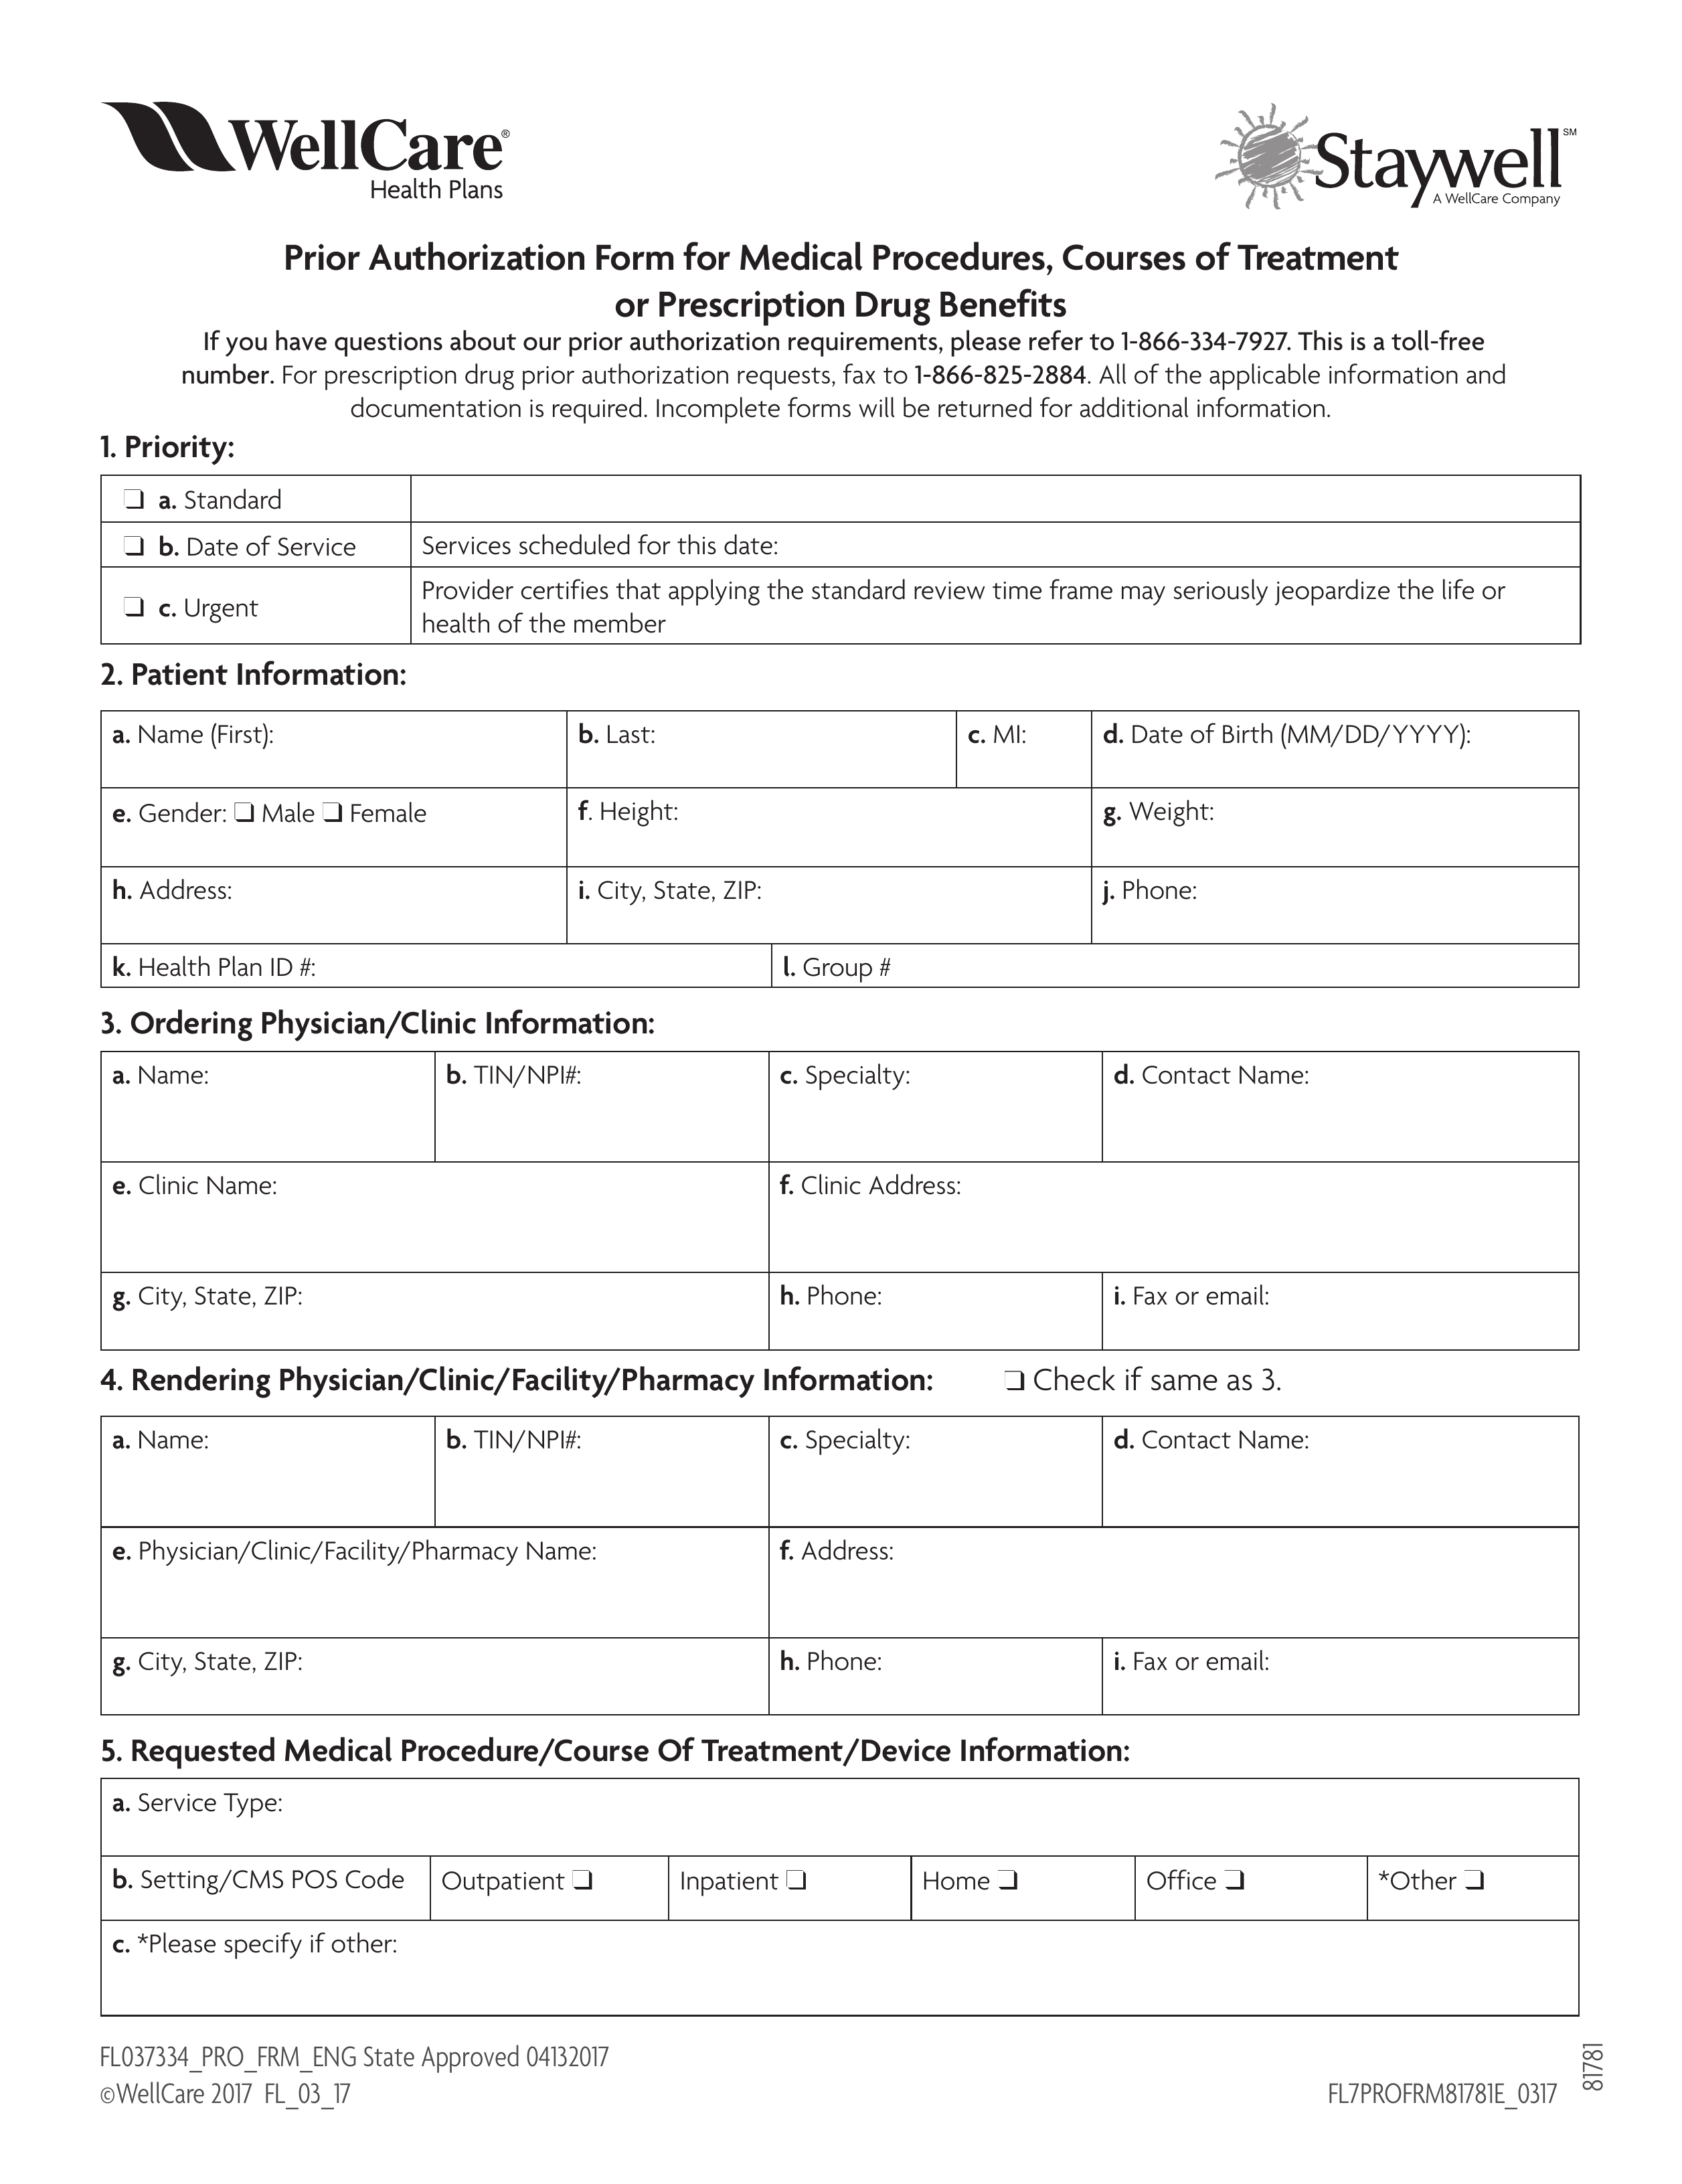 WellCare Prior (Rx) Authorization Form